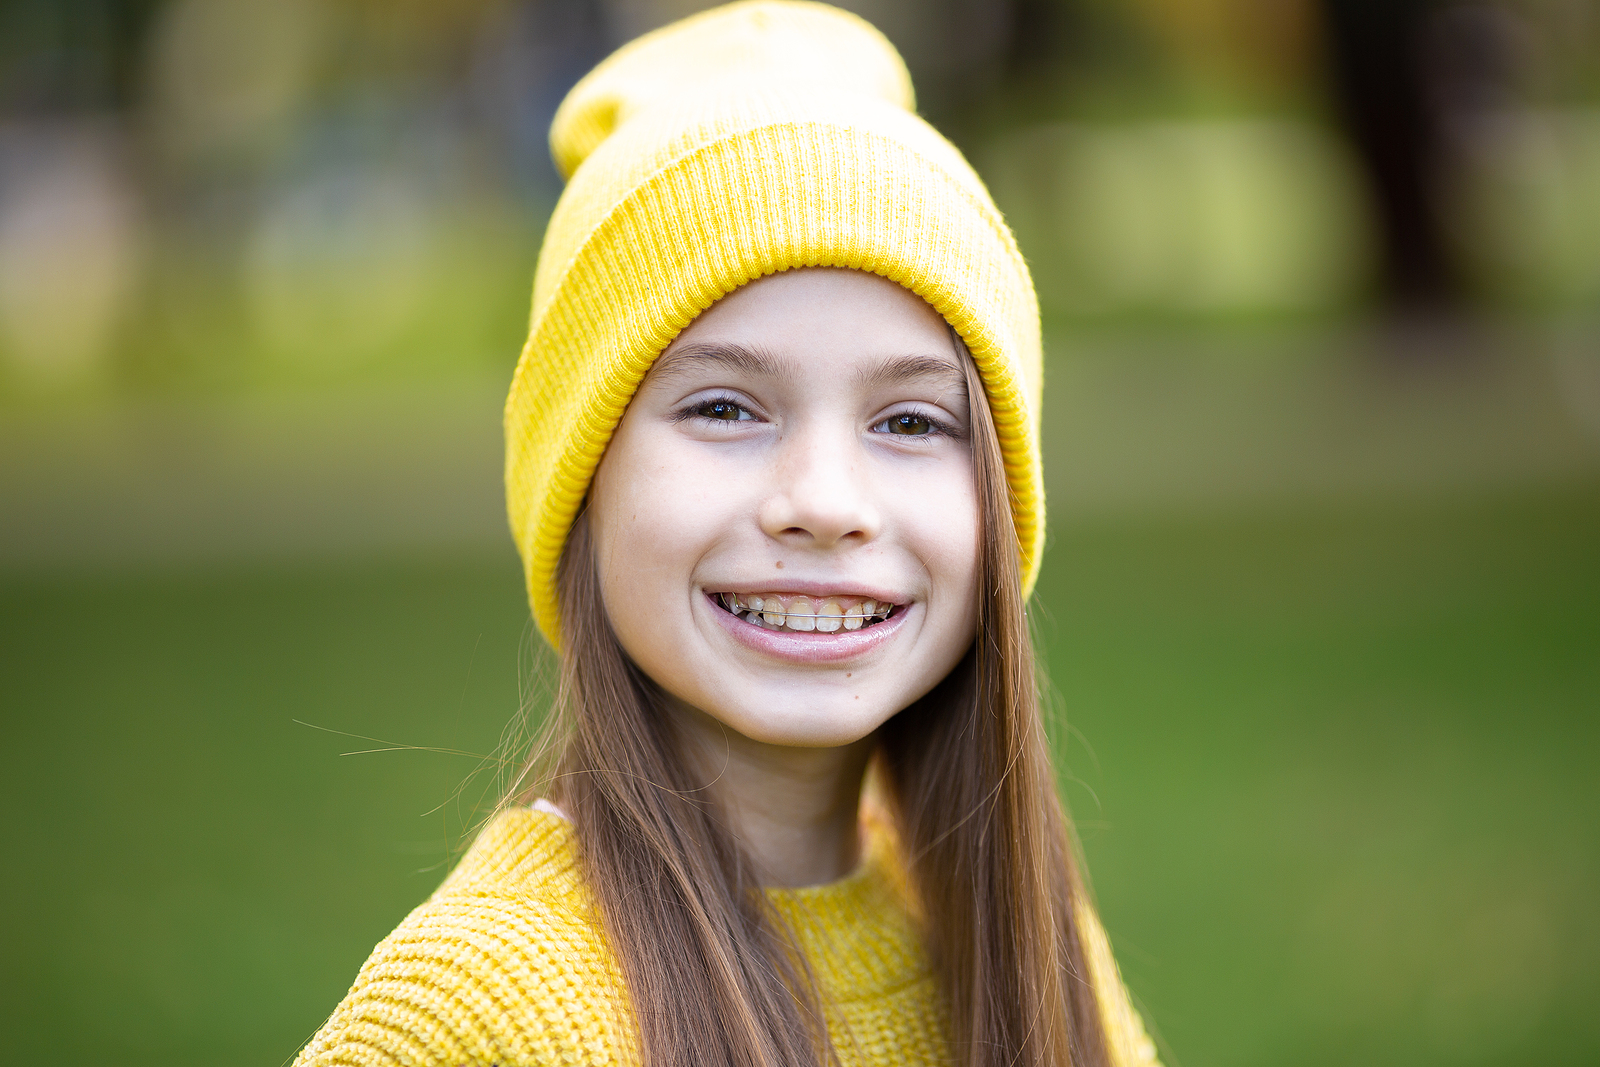 Dentistry for children and teens